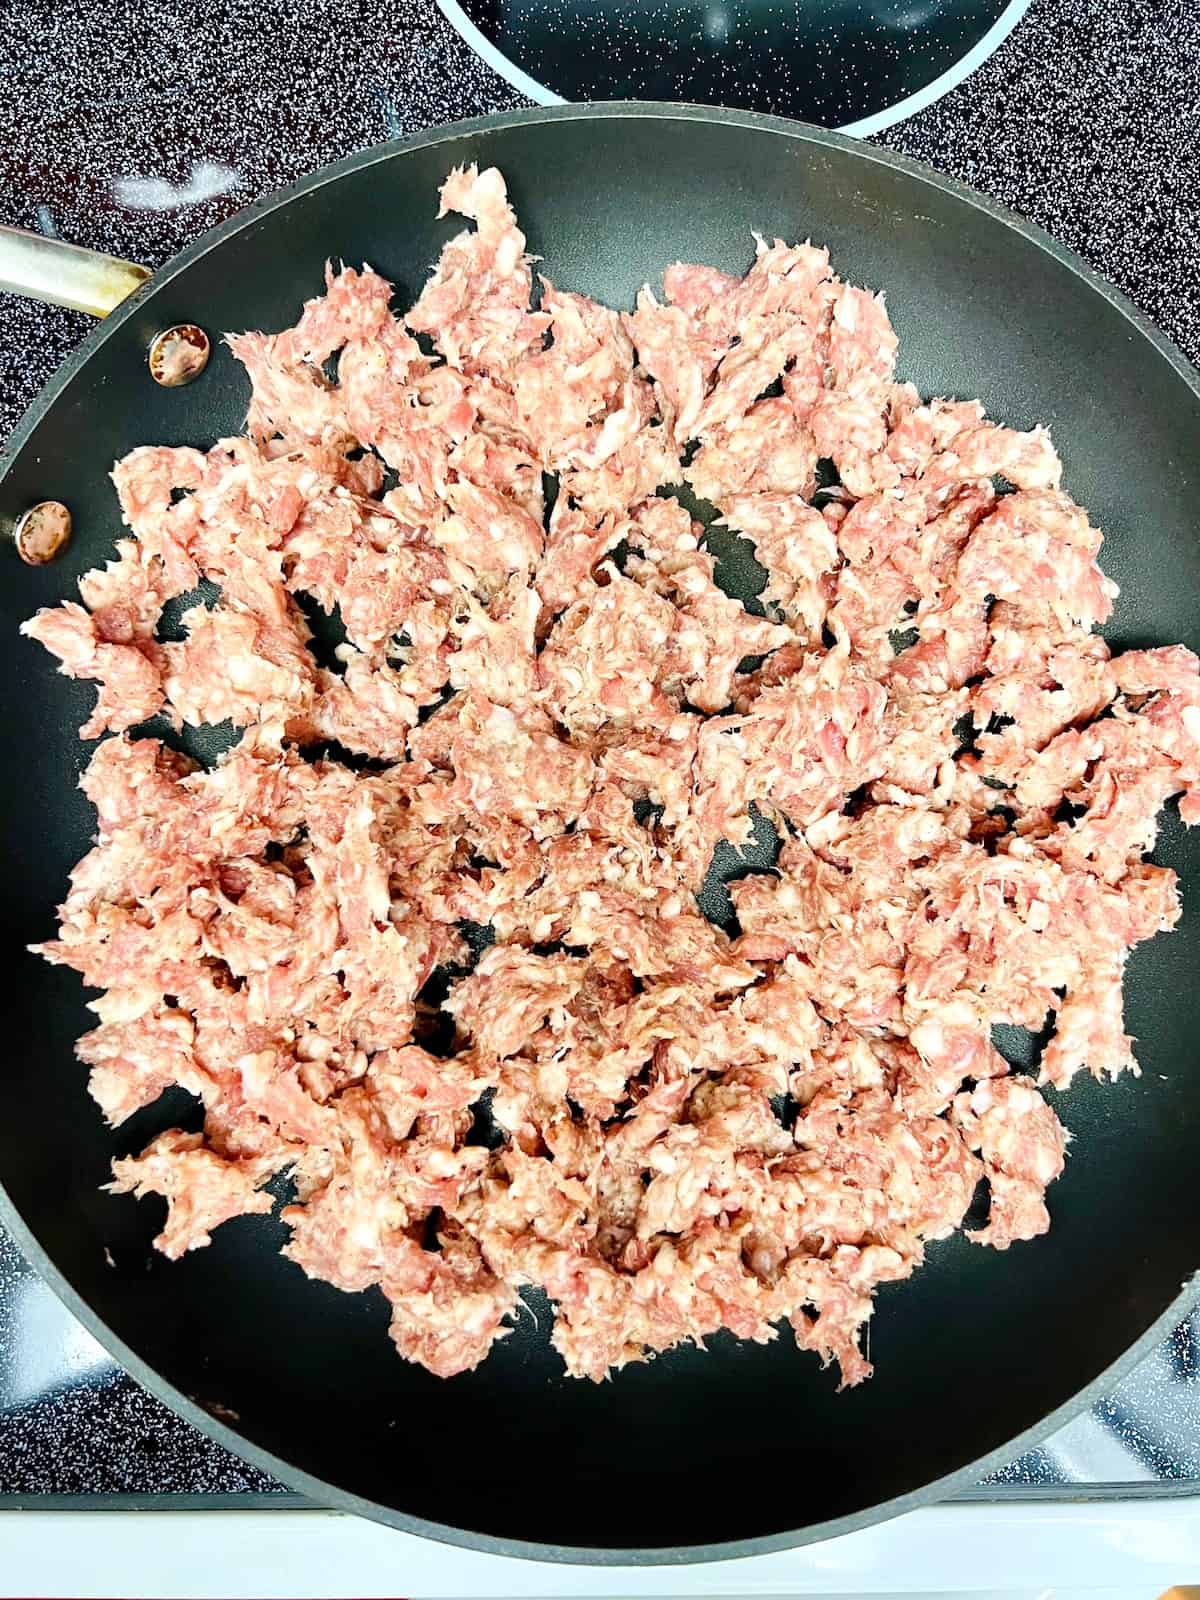 Crumbles of raw sausage in a large skillet on the stove.